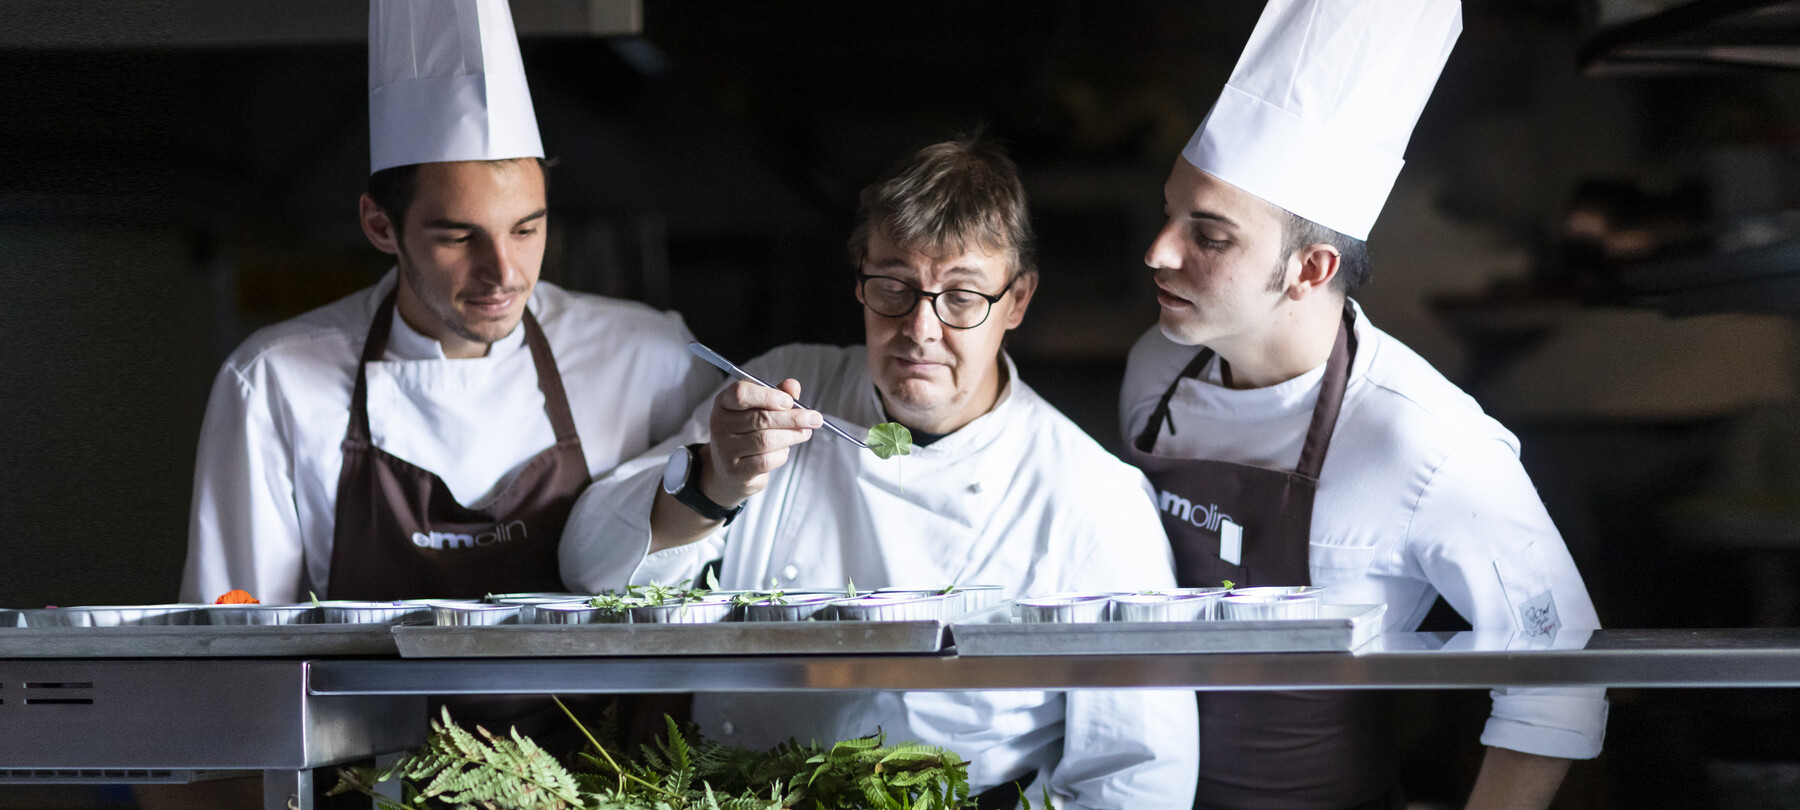 Trentino Food Tales is the culinary future of Trentino